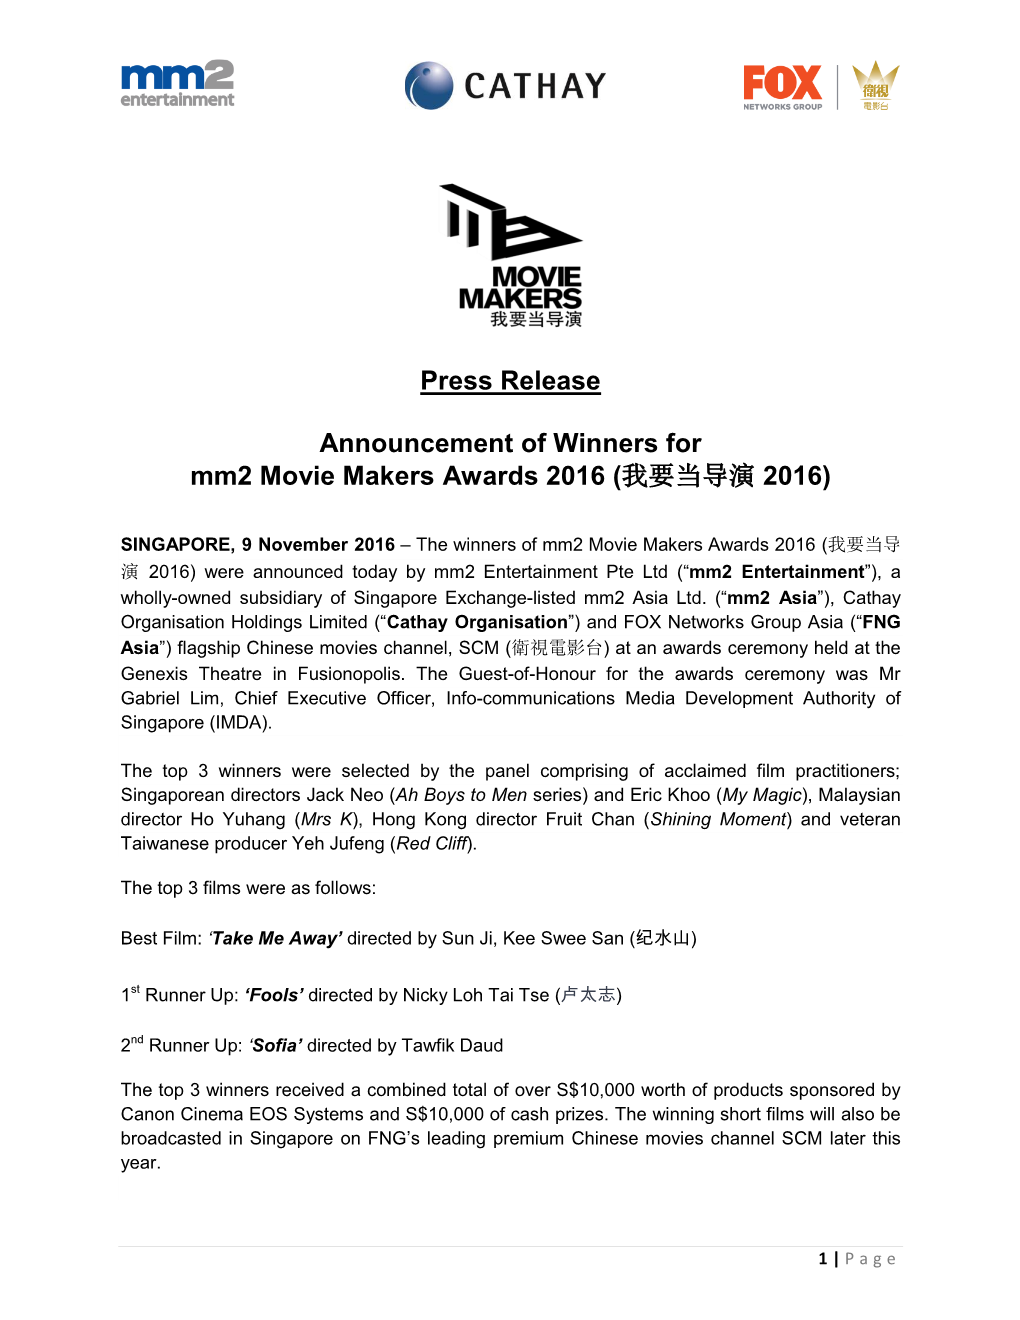 Press Release Announcement of Winners for Mm2 Movie Makers Awards 2016